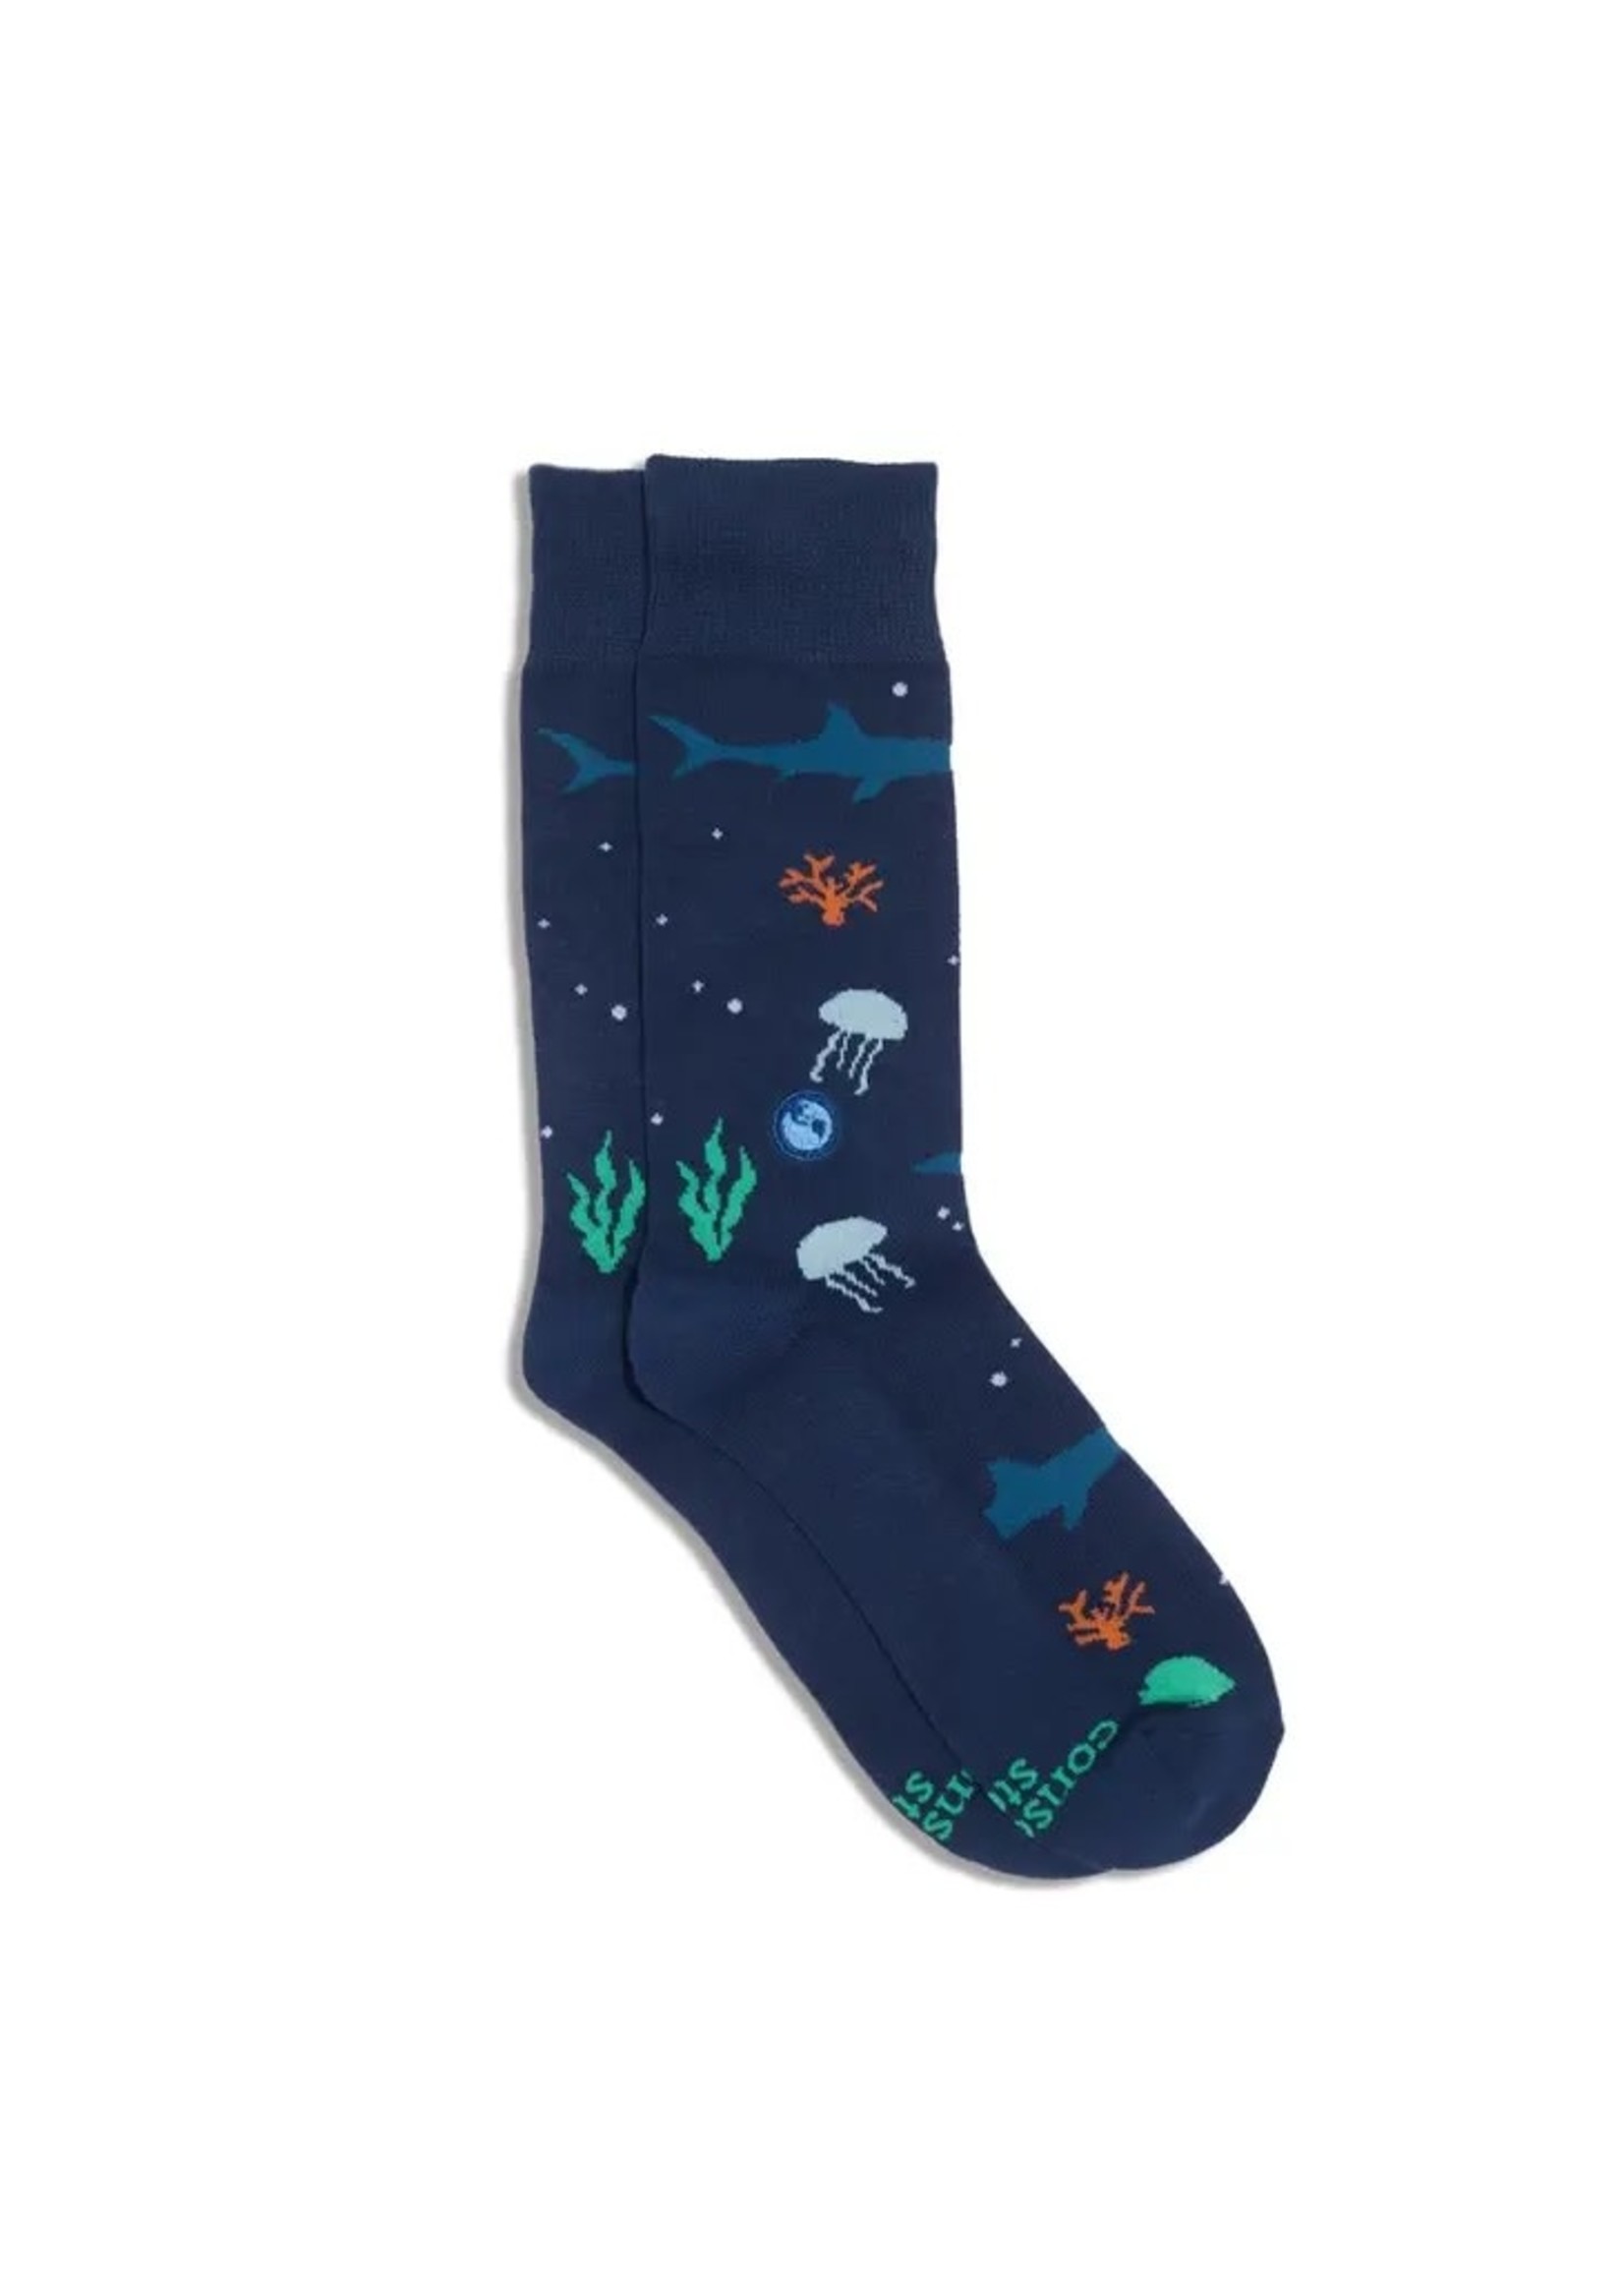 Socks - Protect our Planet Navy Ocean